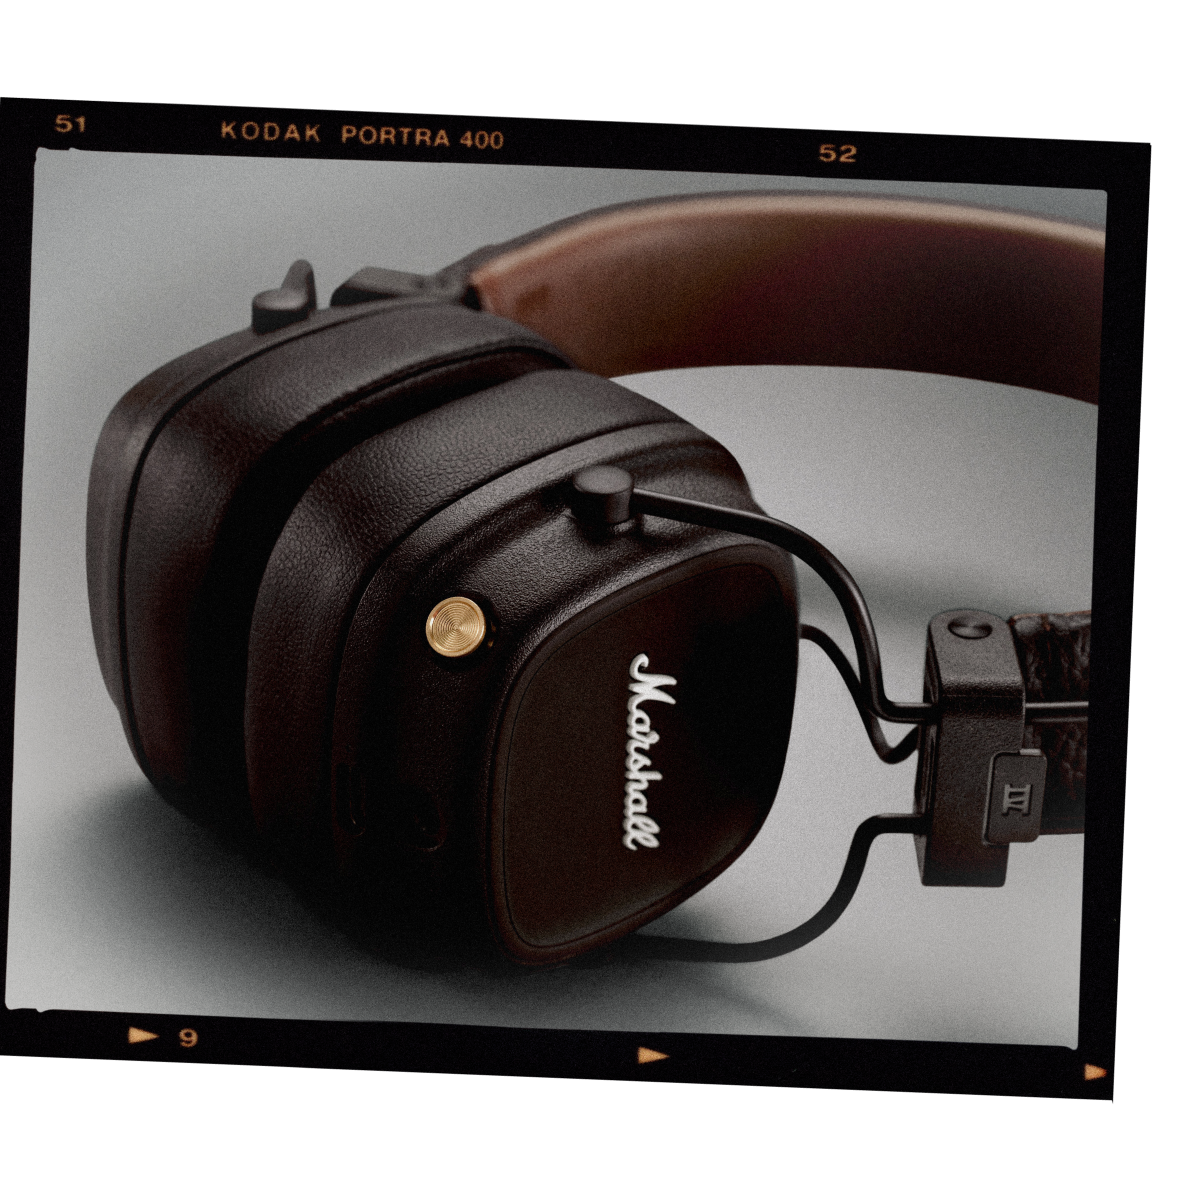 Major IV wireless headphones deliver unmatched sound quality 